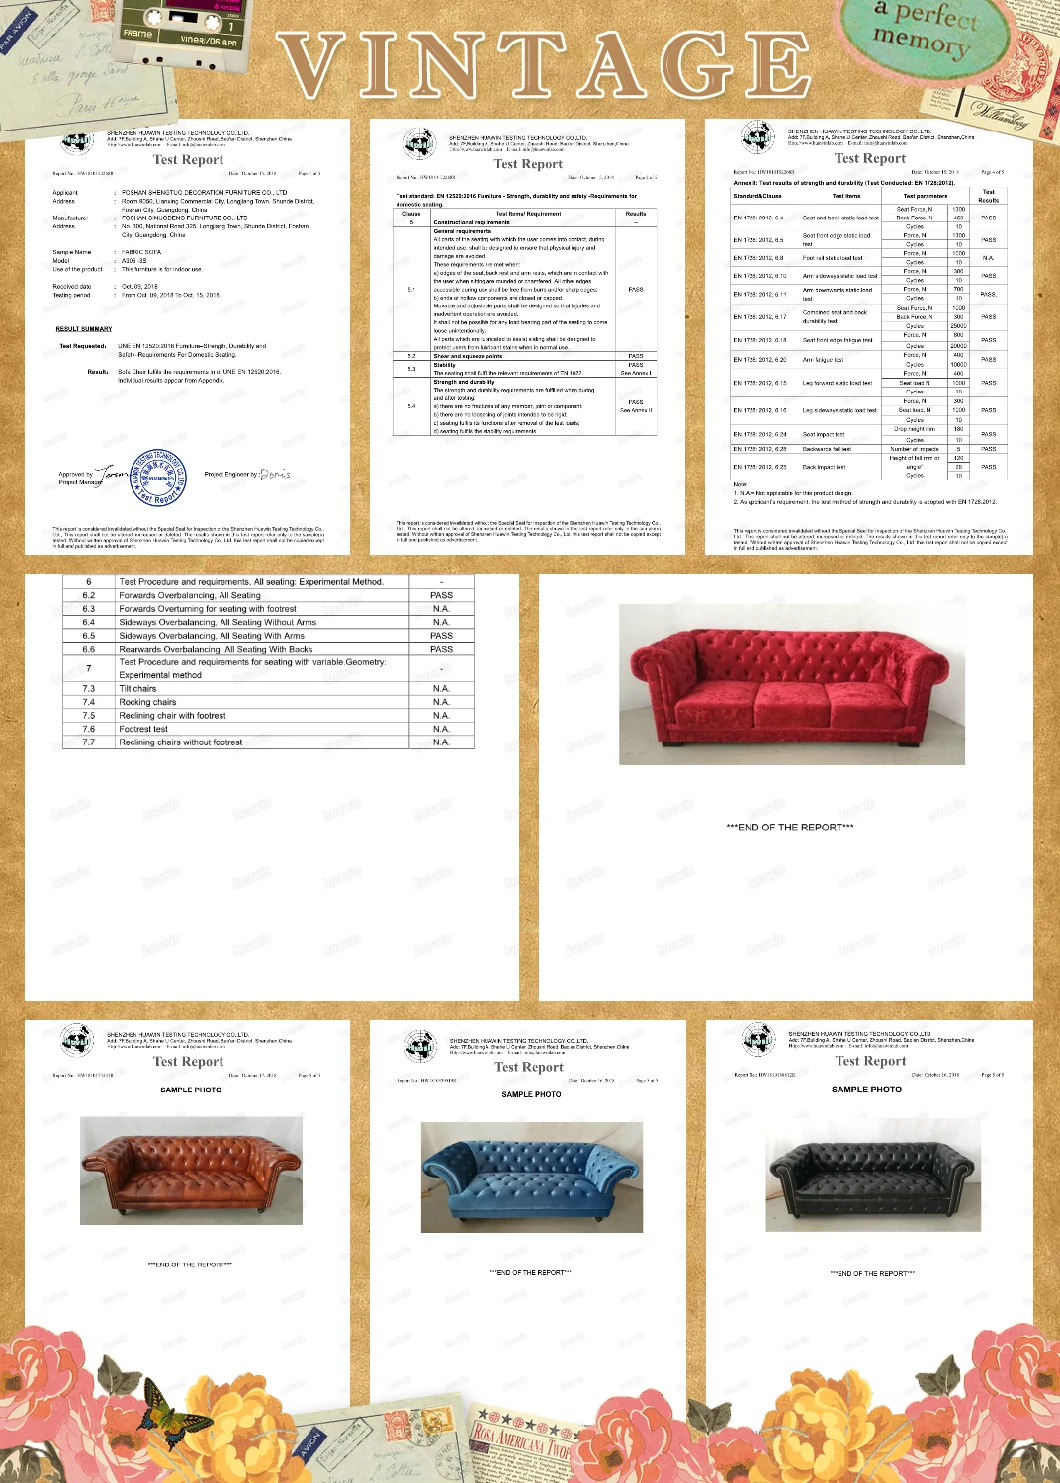 Mixed Leather and Fabric Sofas Big American Style Sofa American Design Sofa American Classic Sofa